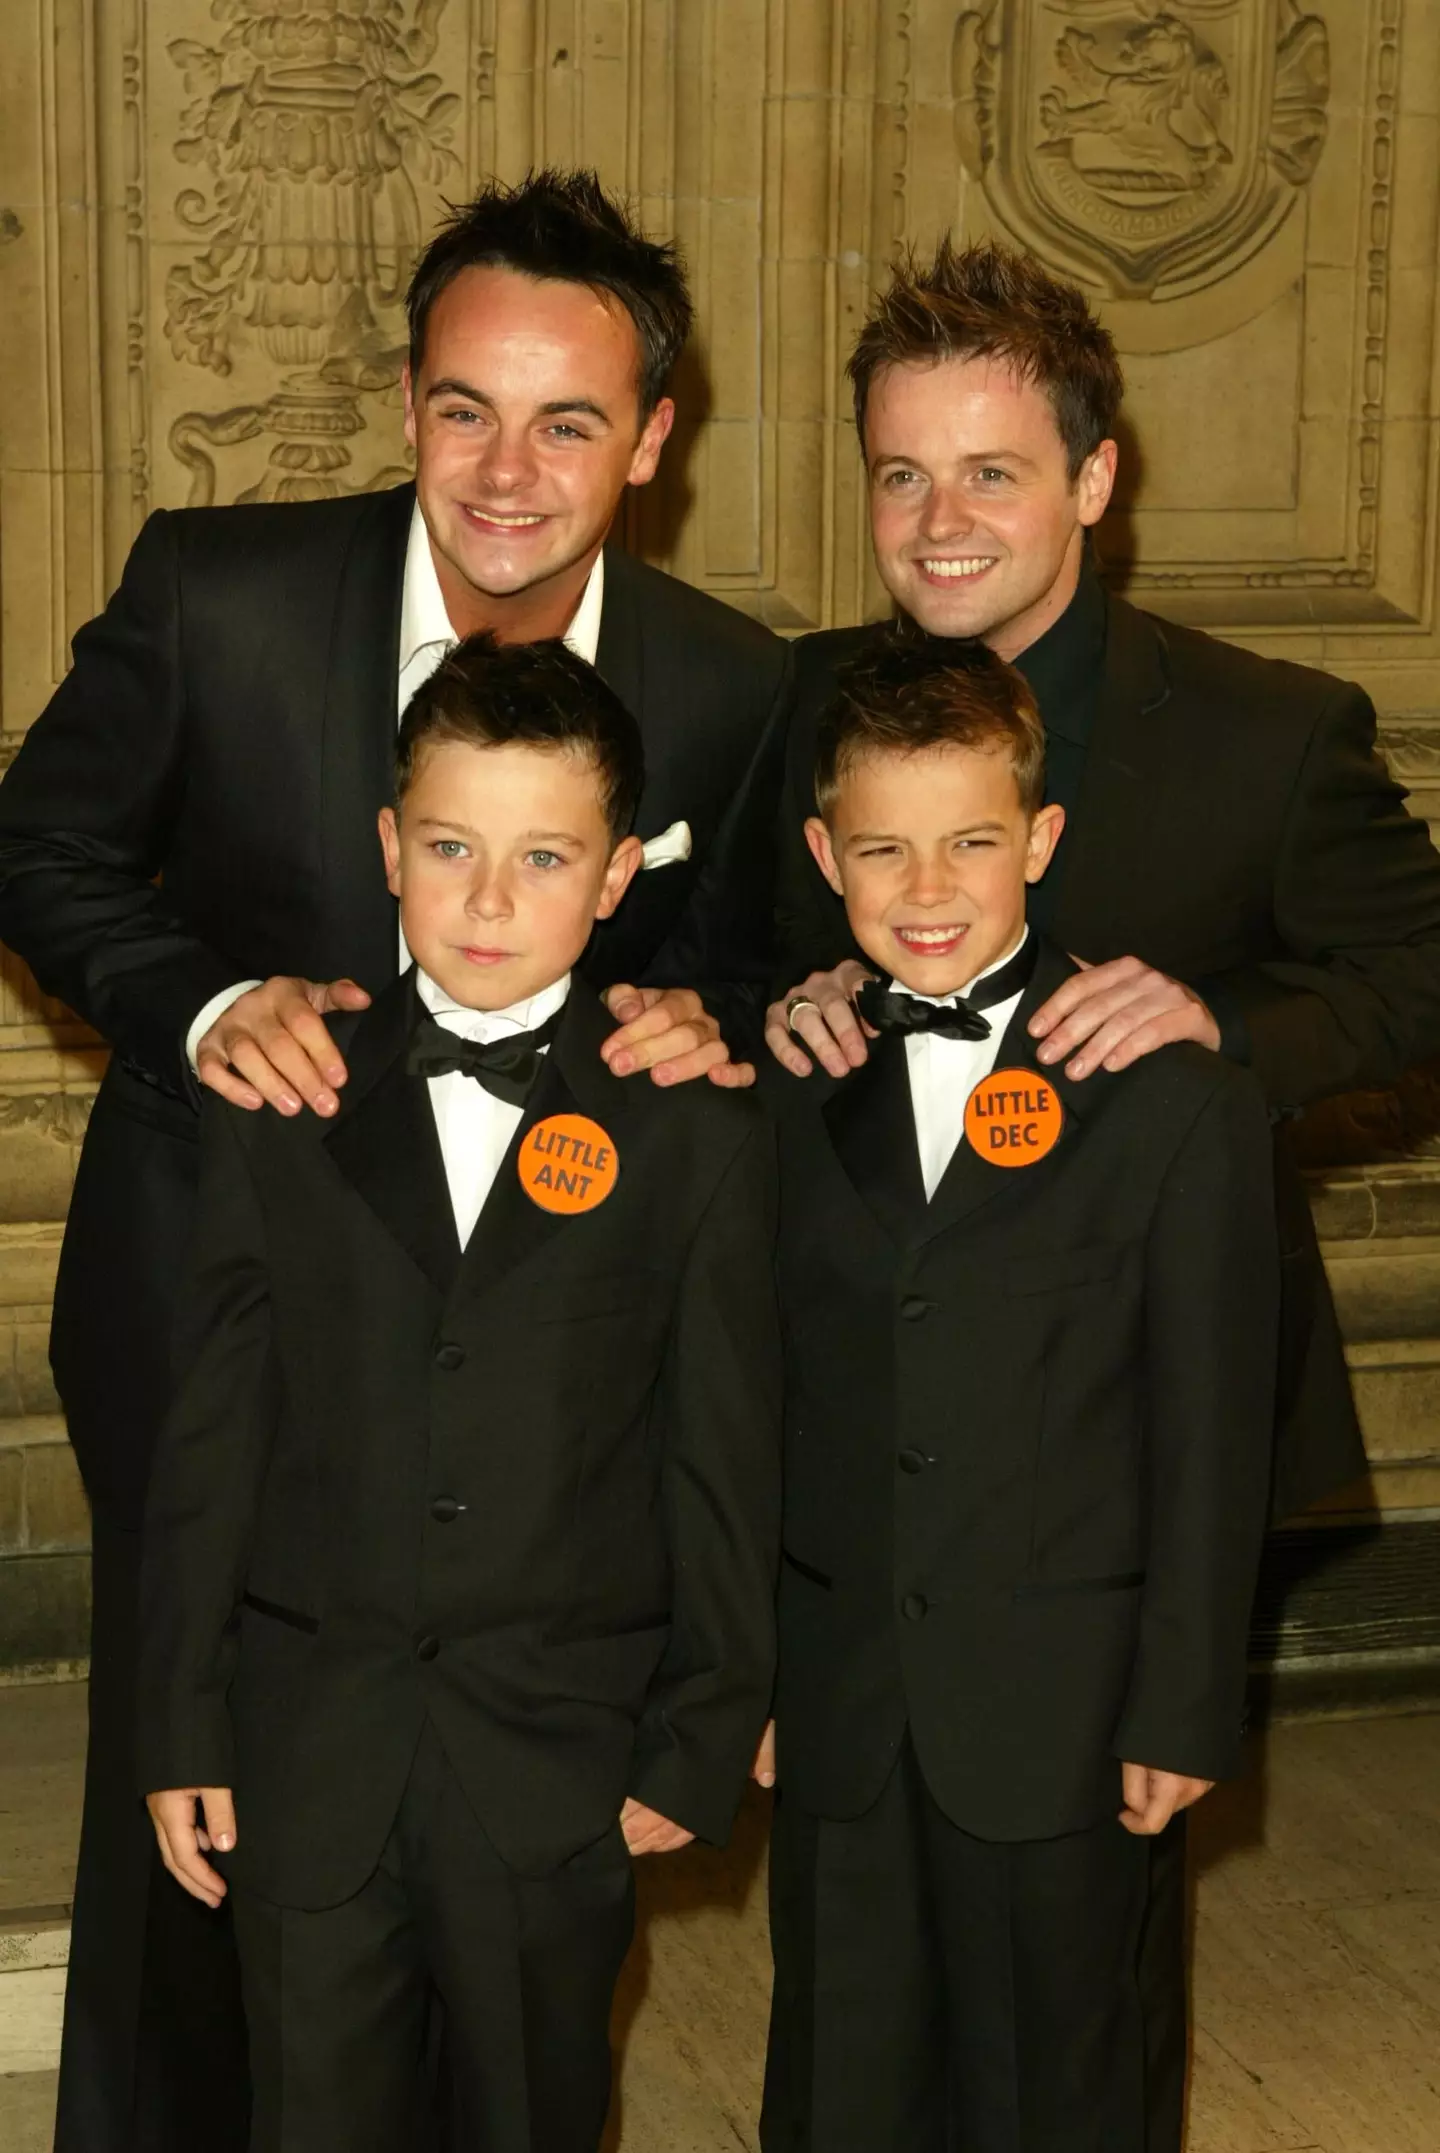 Little Ant and Dec in 2003.